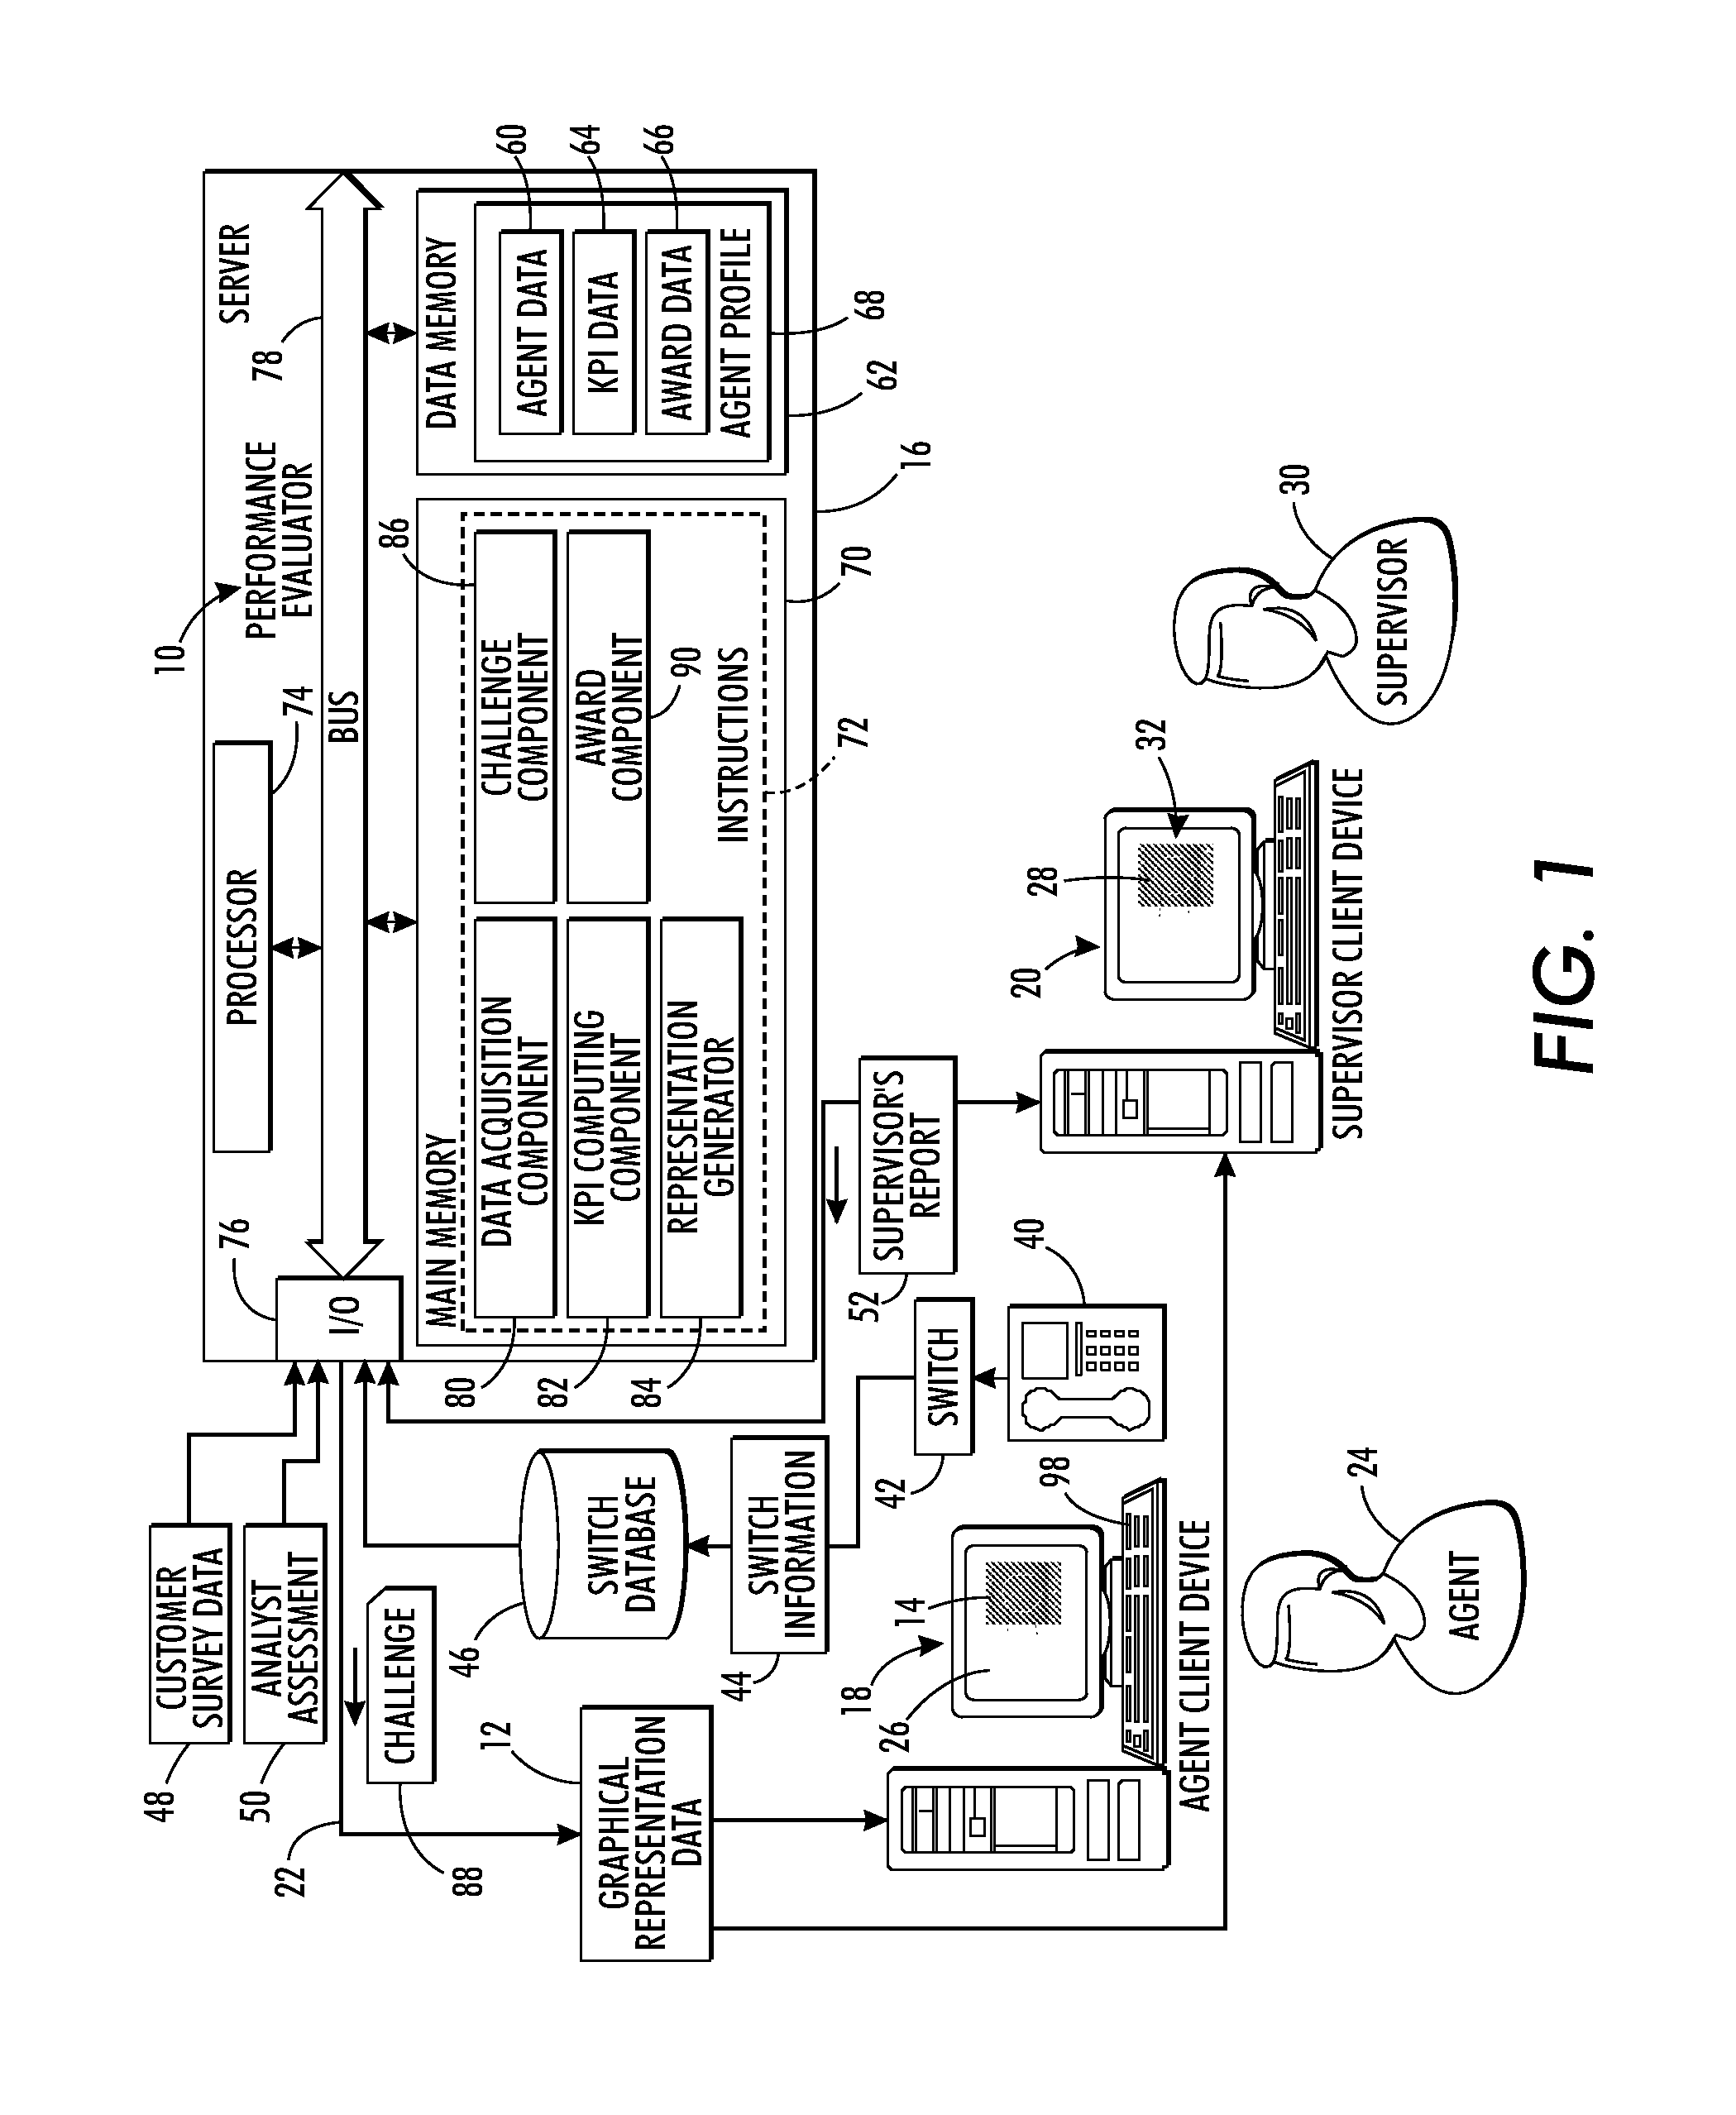 System and method for enhancing call center performance